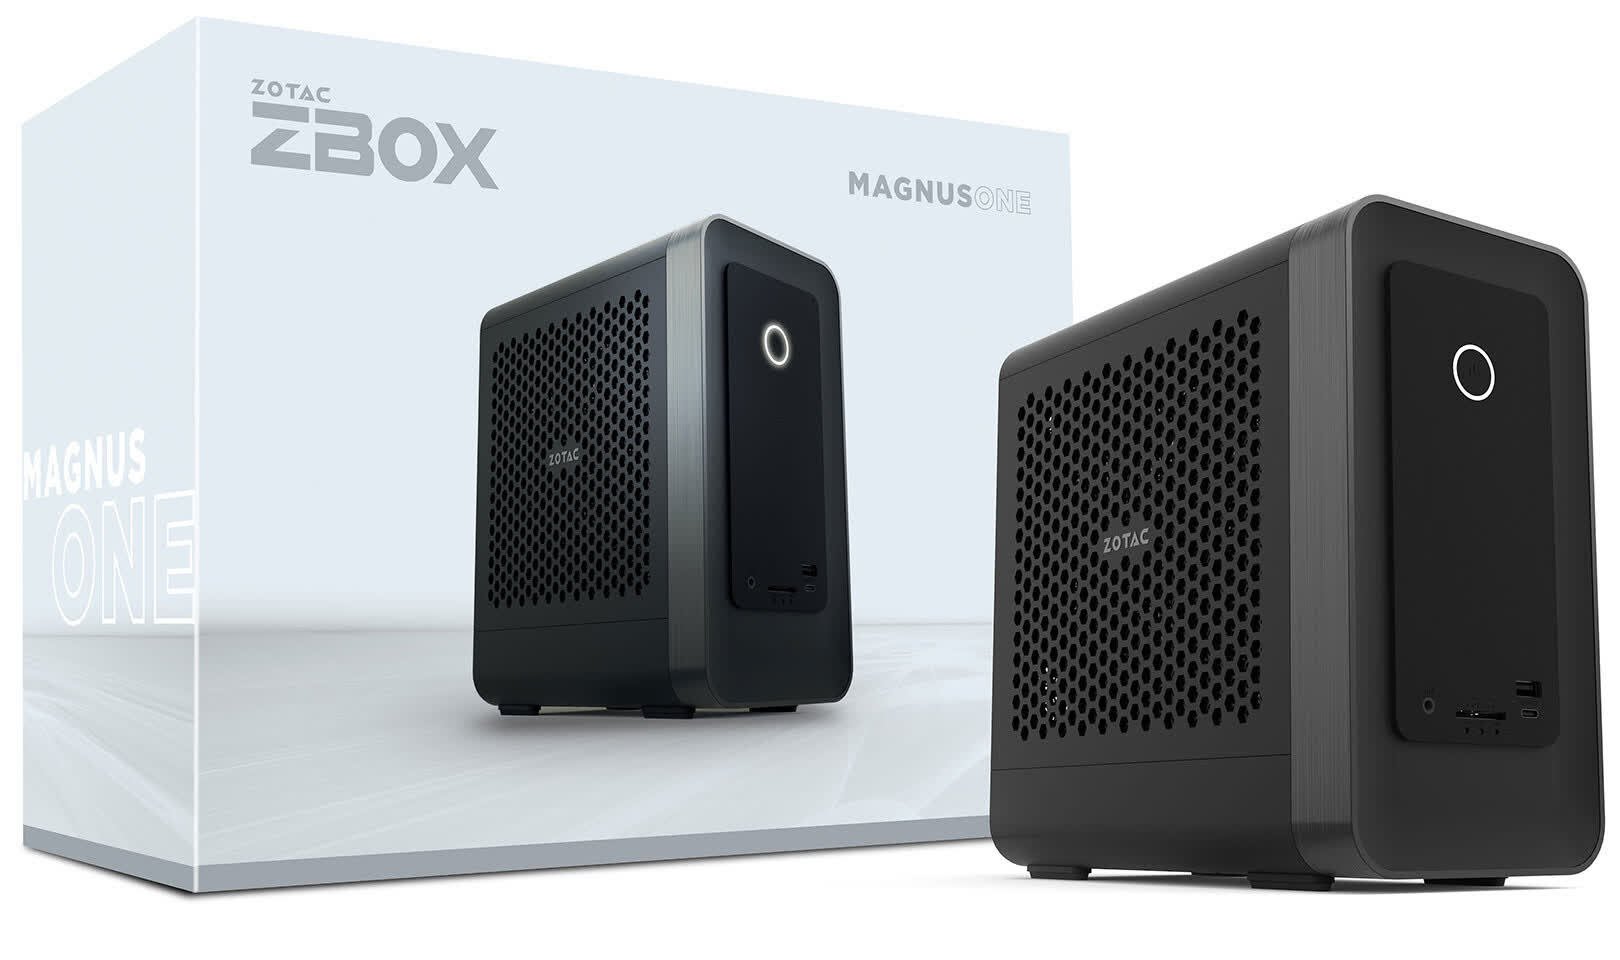 Zotac expands mini-PC gaming lineup with the Magnus One